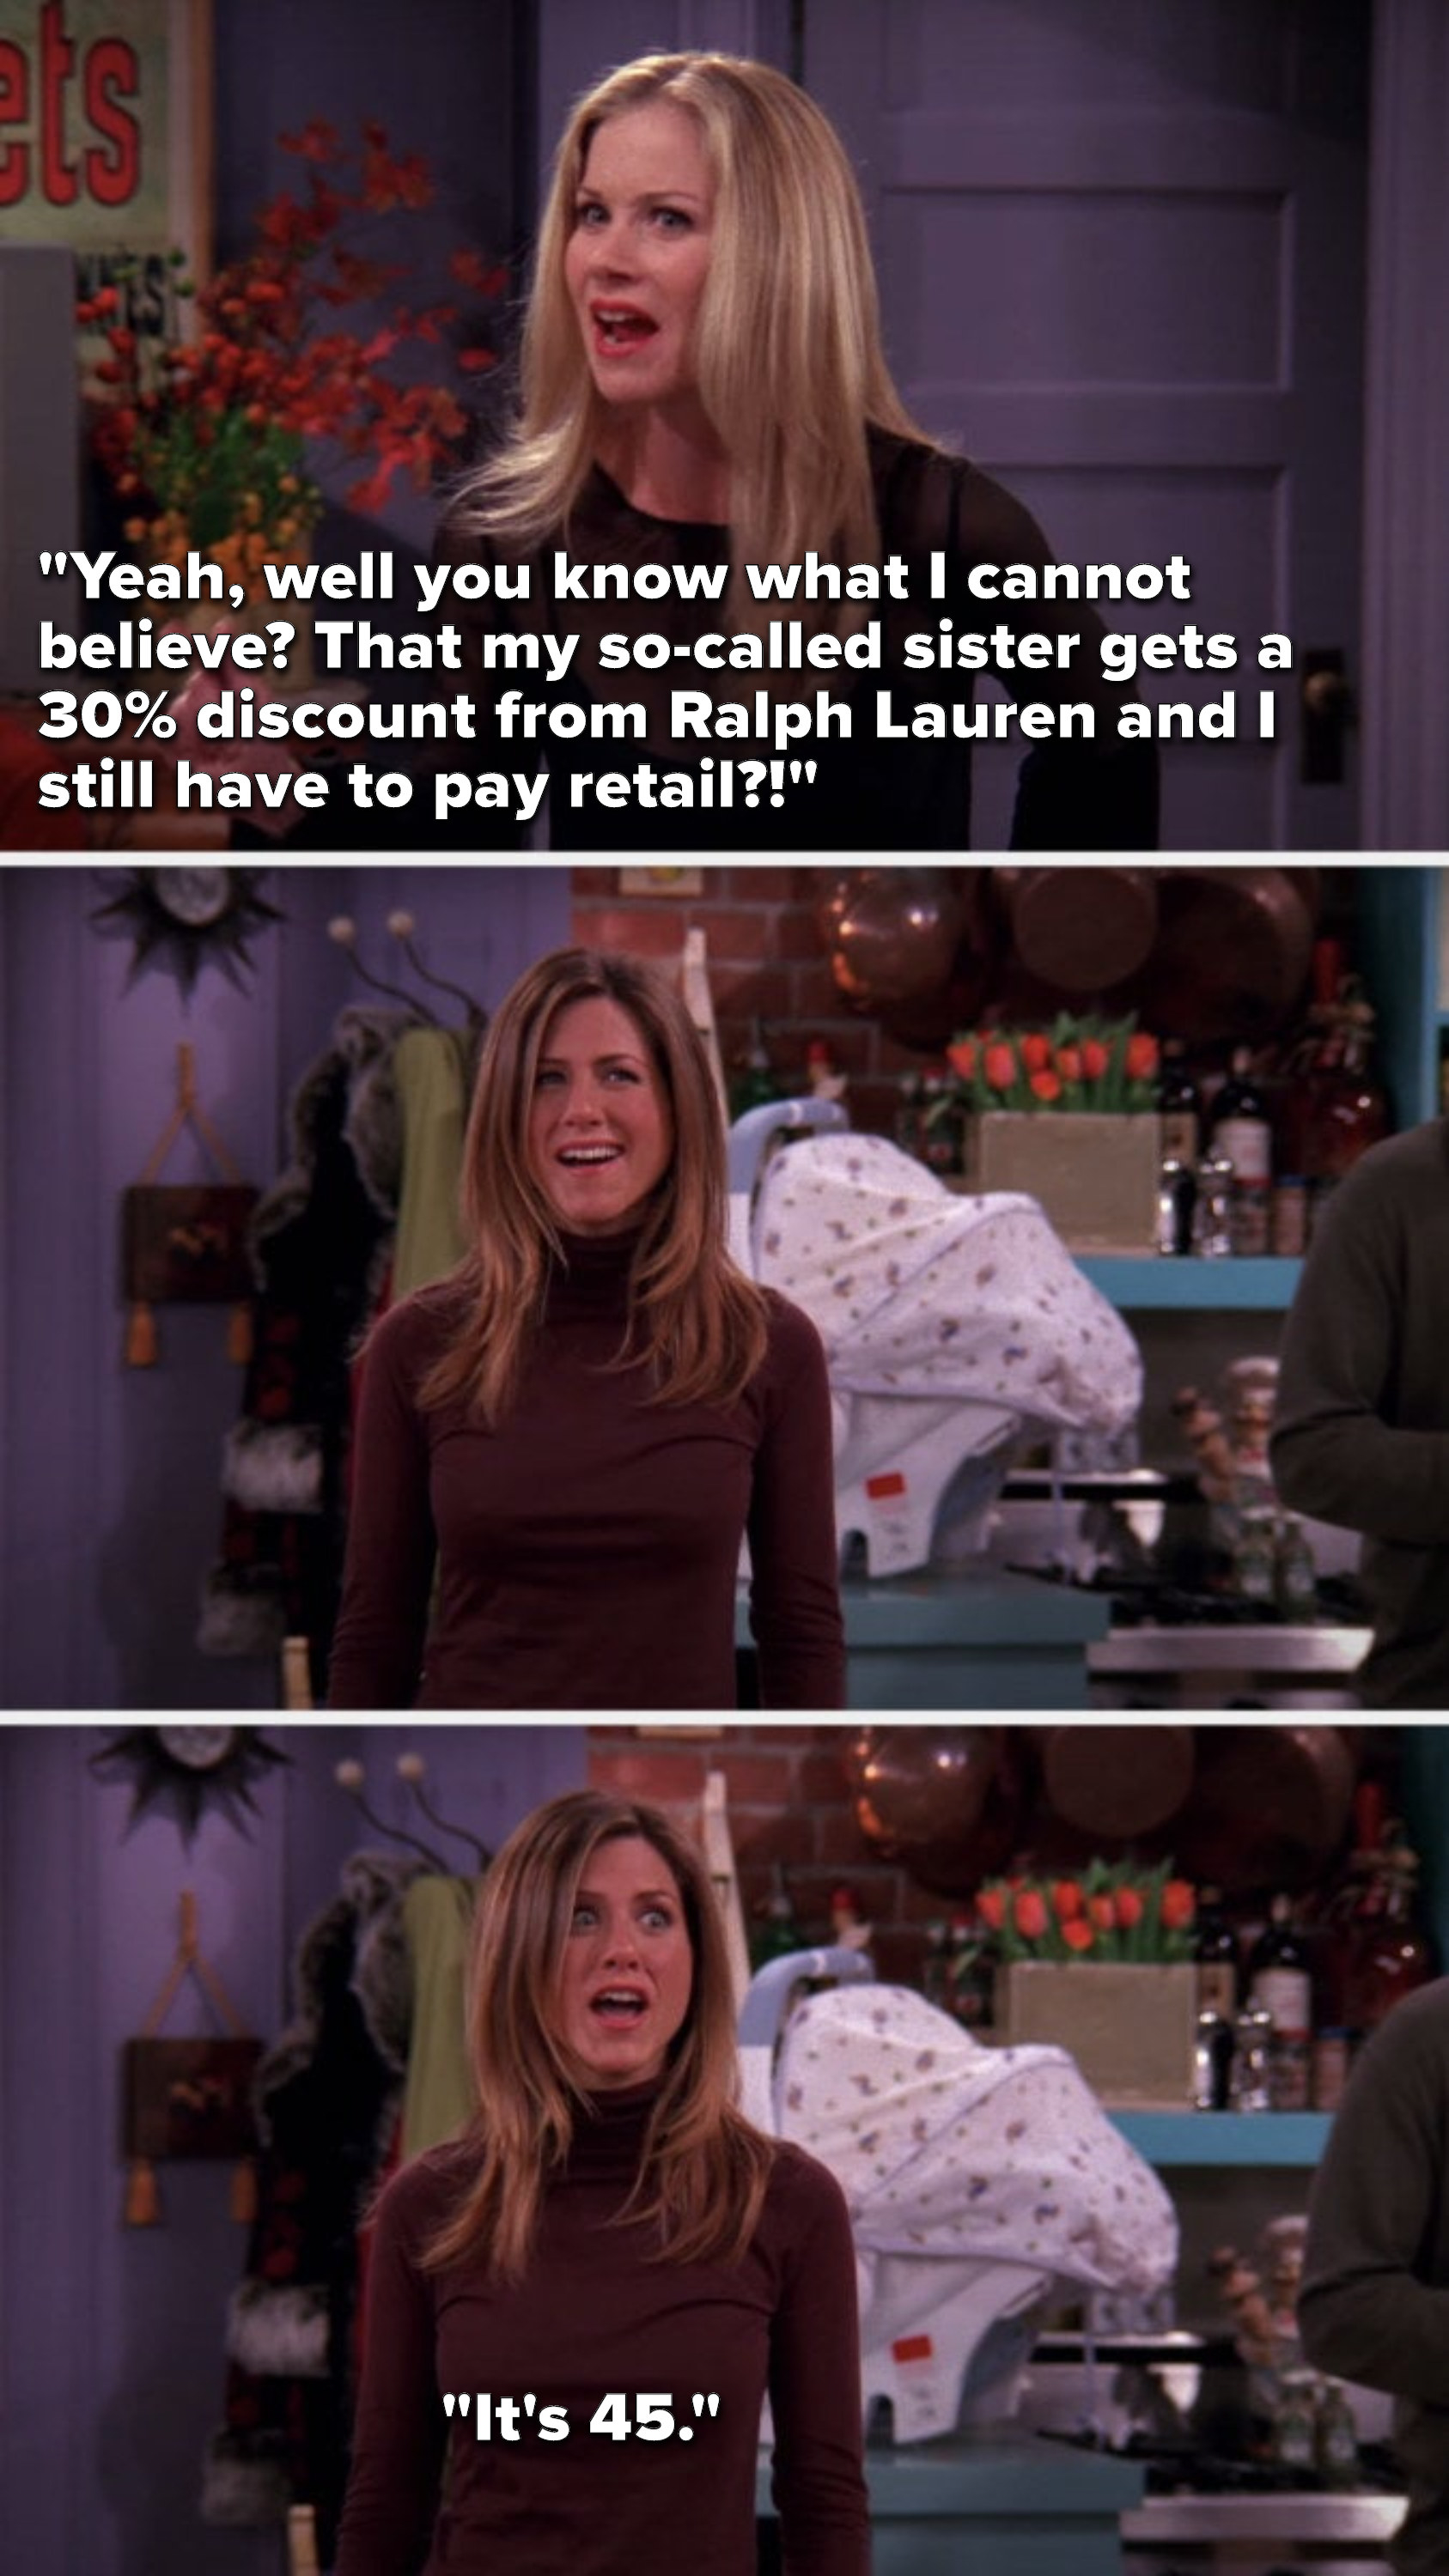 Amy says, &quot;Yeah, well you know what I cannot believe, that my so-called sister gets a 30% discount from Ralph Lauren and I still have to pay retail,&quot; Rachel laughs and then says, &quot;It&#x27;s 45&quot;